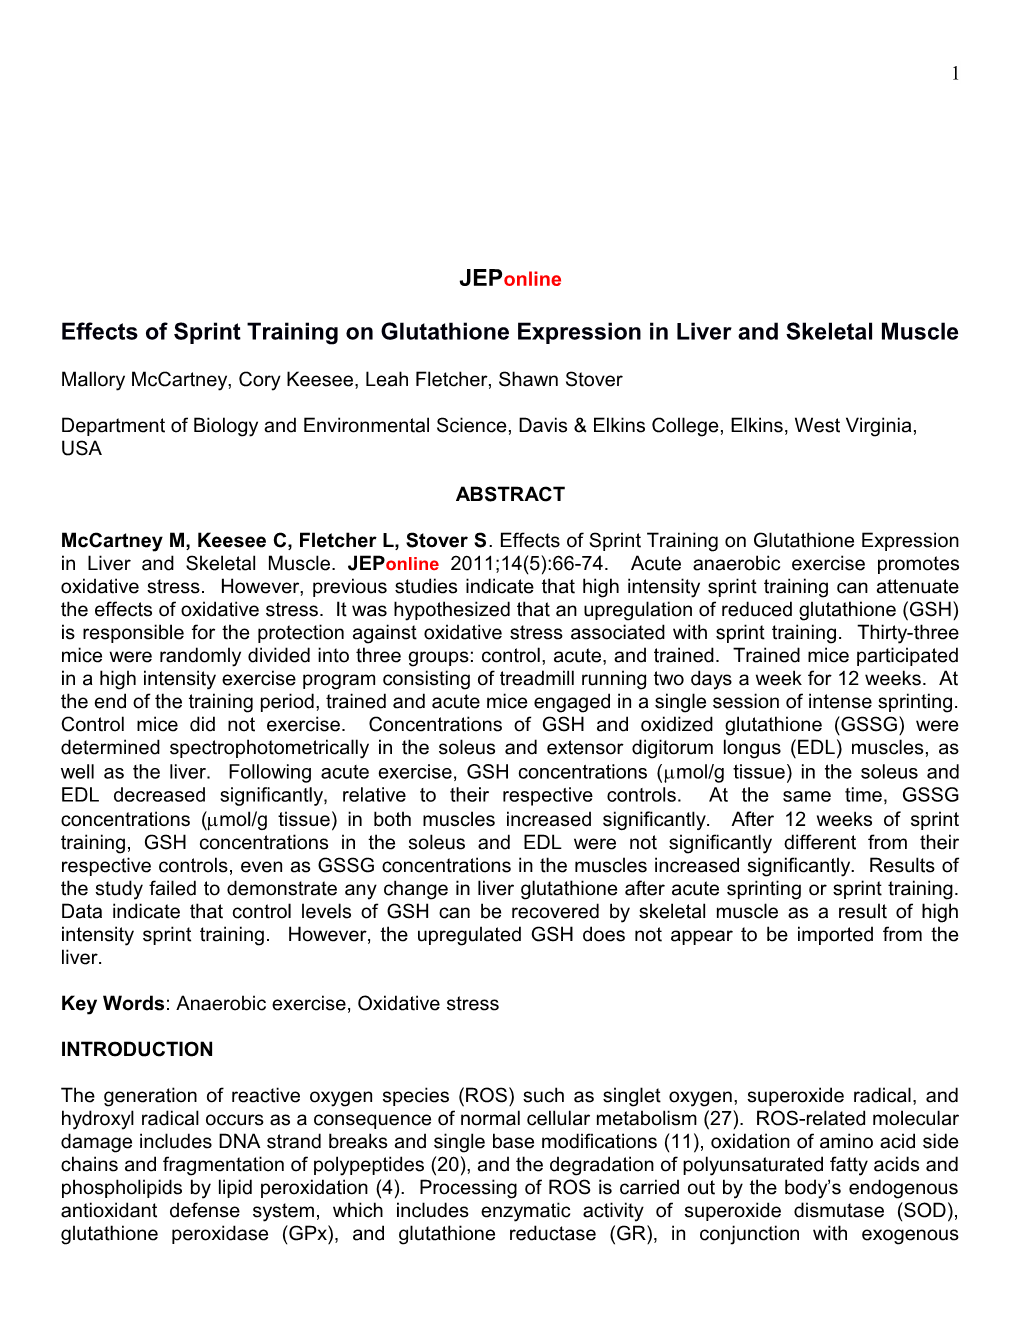 Effects of Sprint Training on Glutathione Expression in Liver and Skeletal Muscle